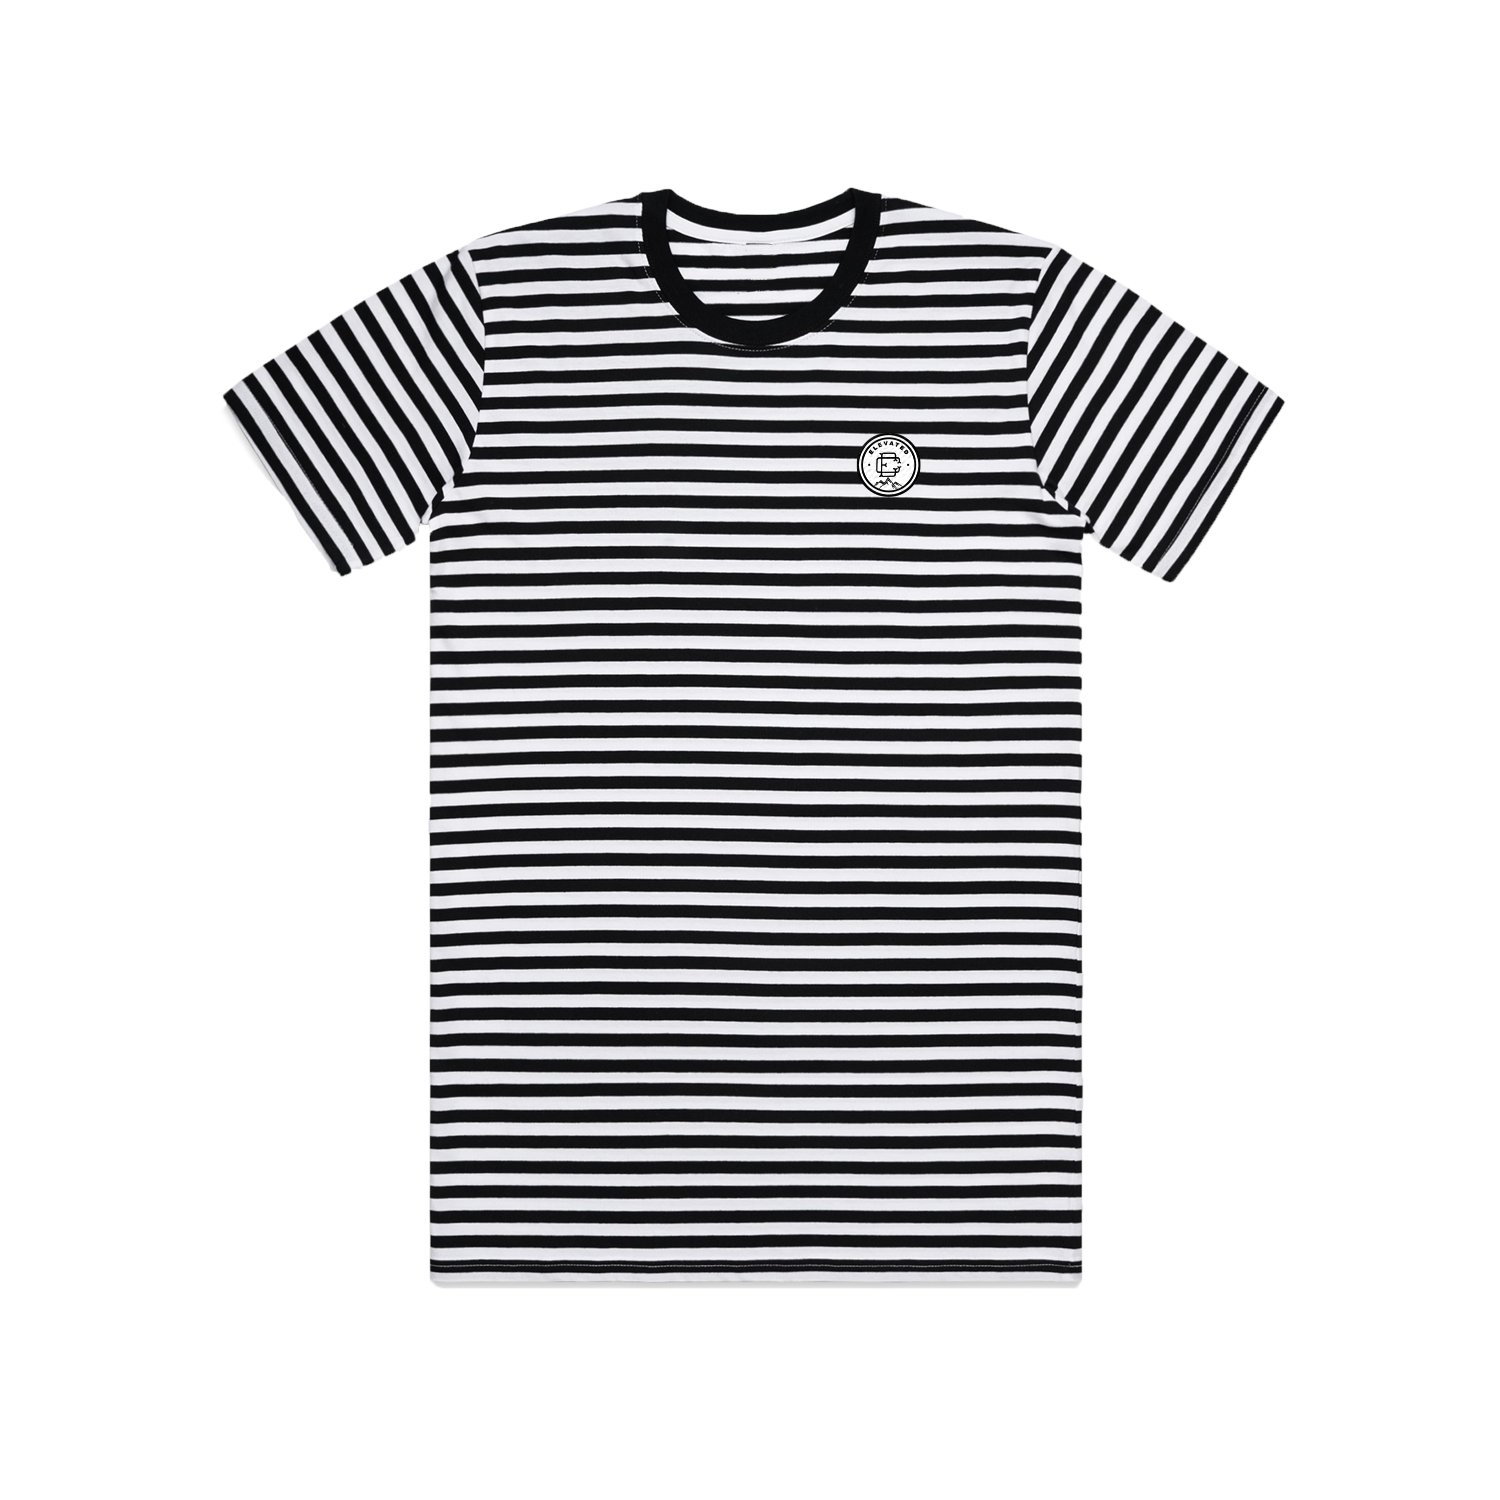 Elevated Stripped Tee - Black Widow Black/White (SOLD OUT)